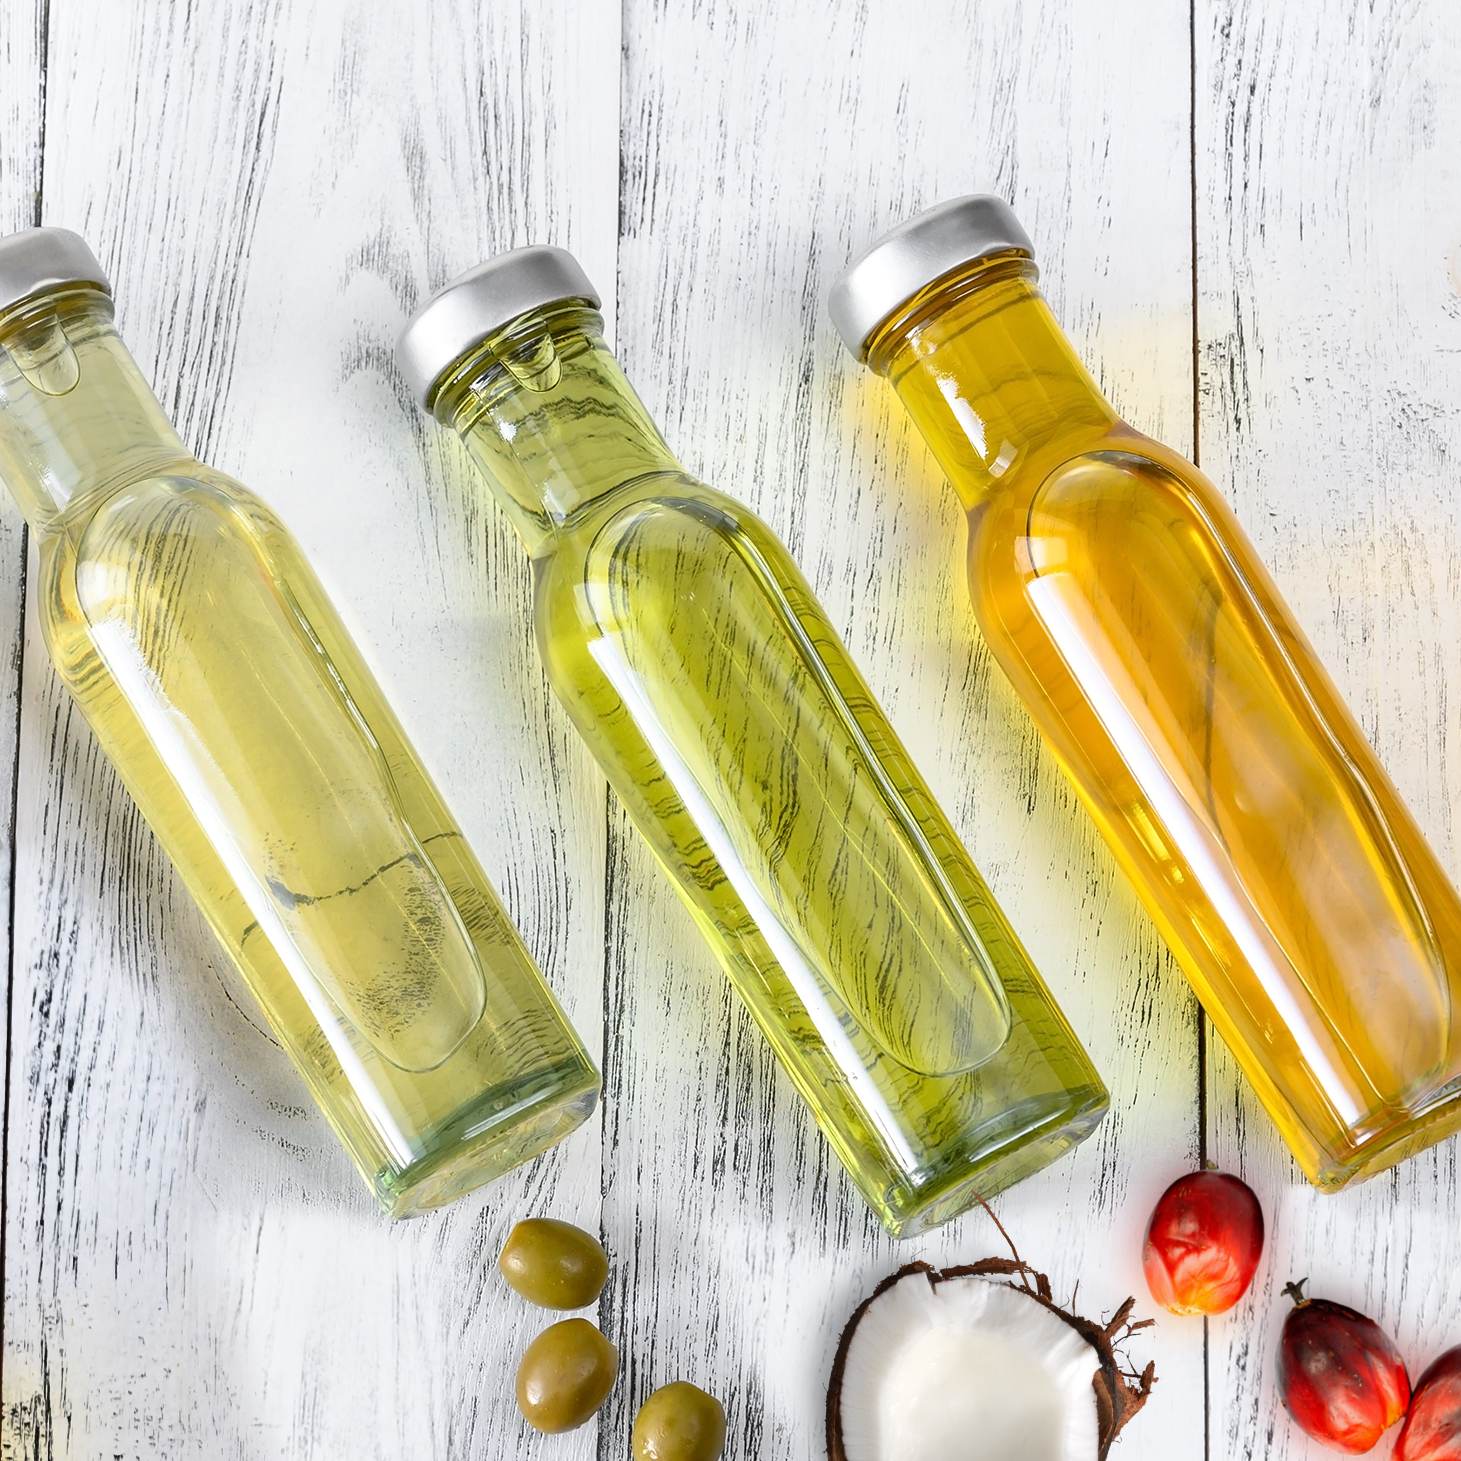 Palm Oil Vs Coconut Oil Vs Olive Oil - Which One is the Best?